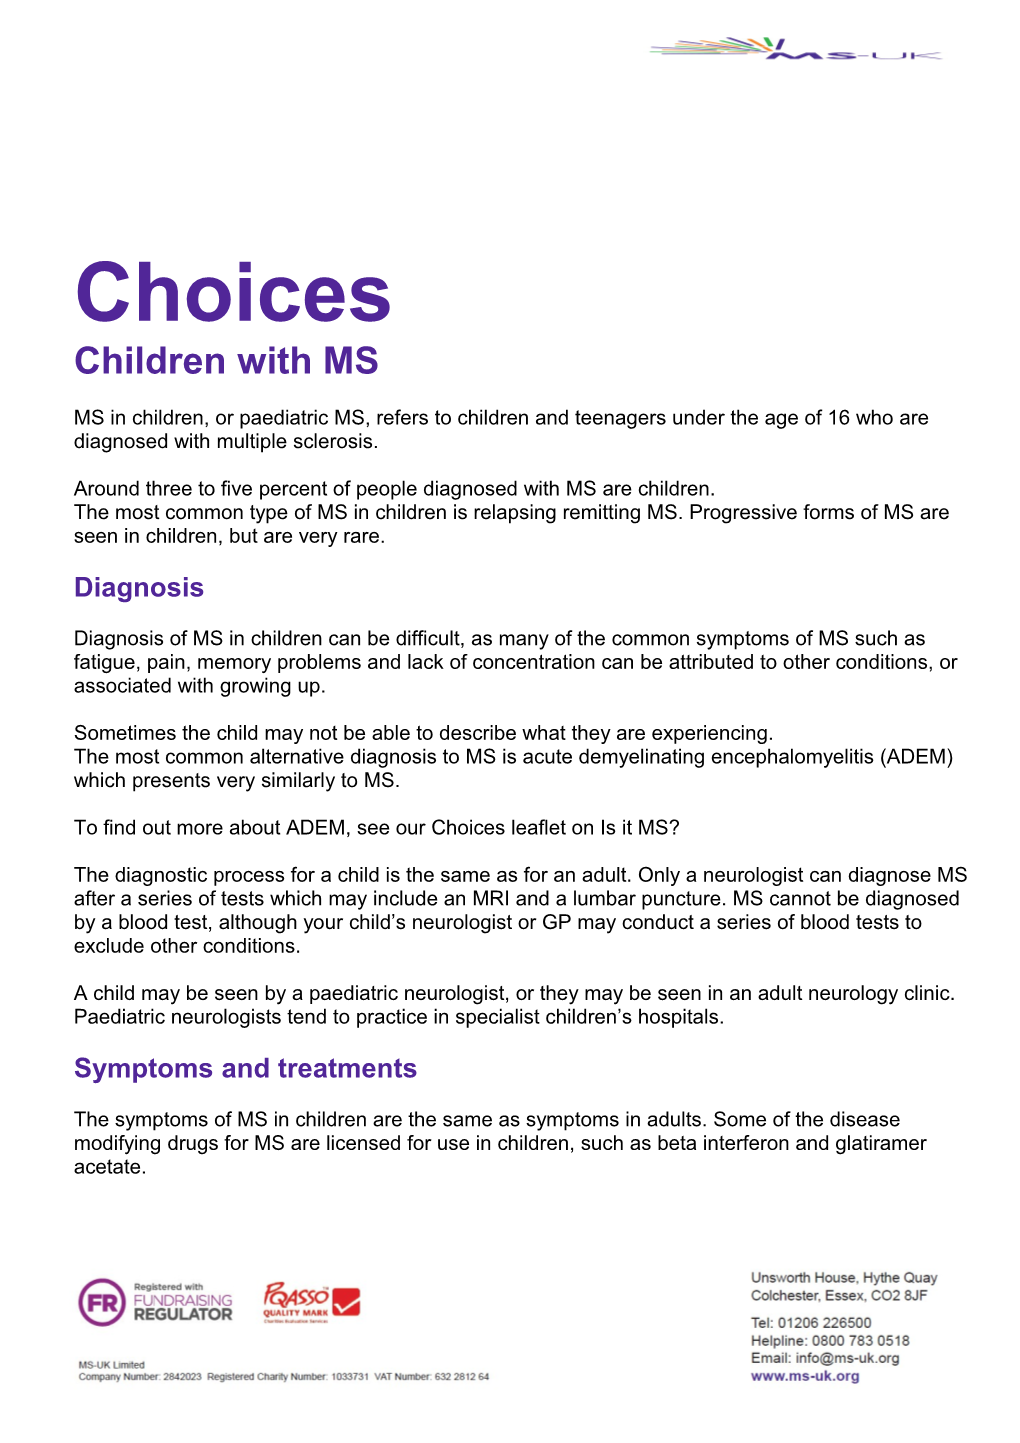 Children with MS